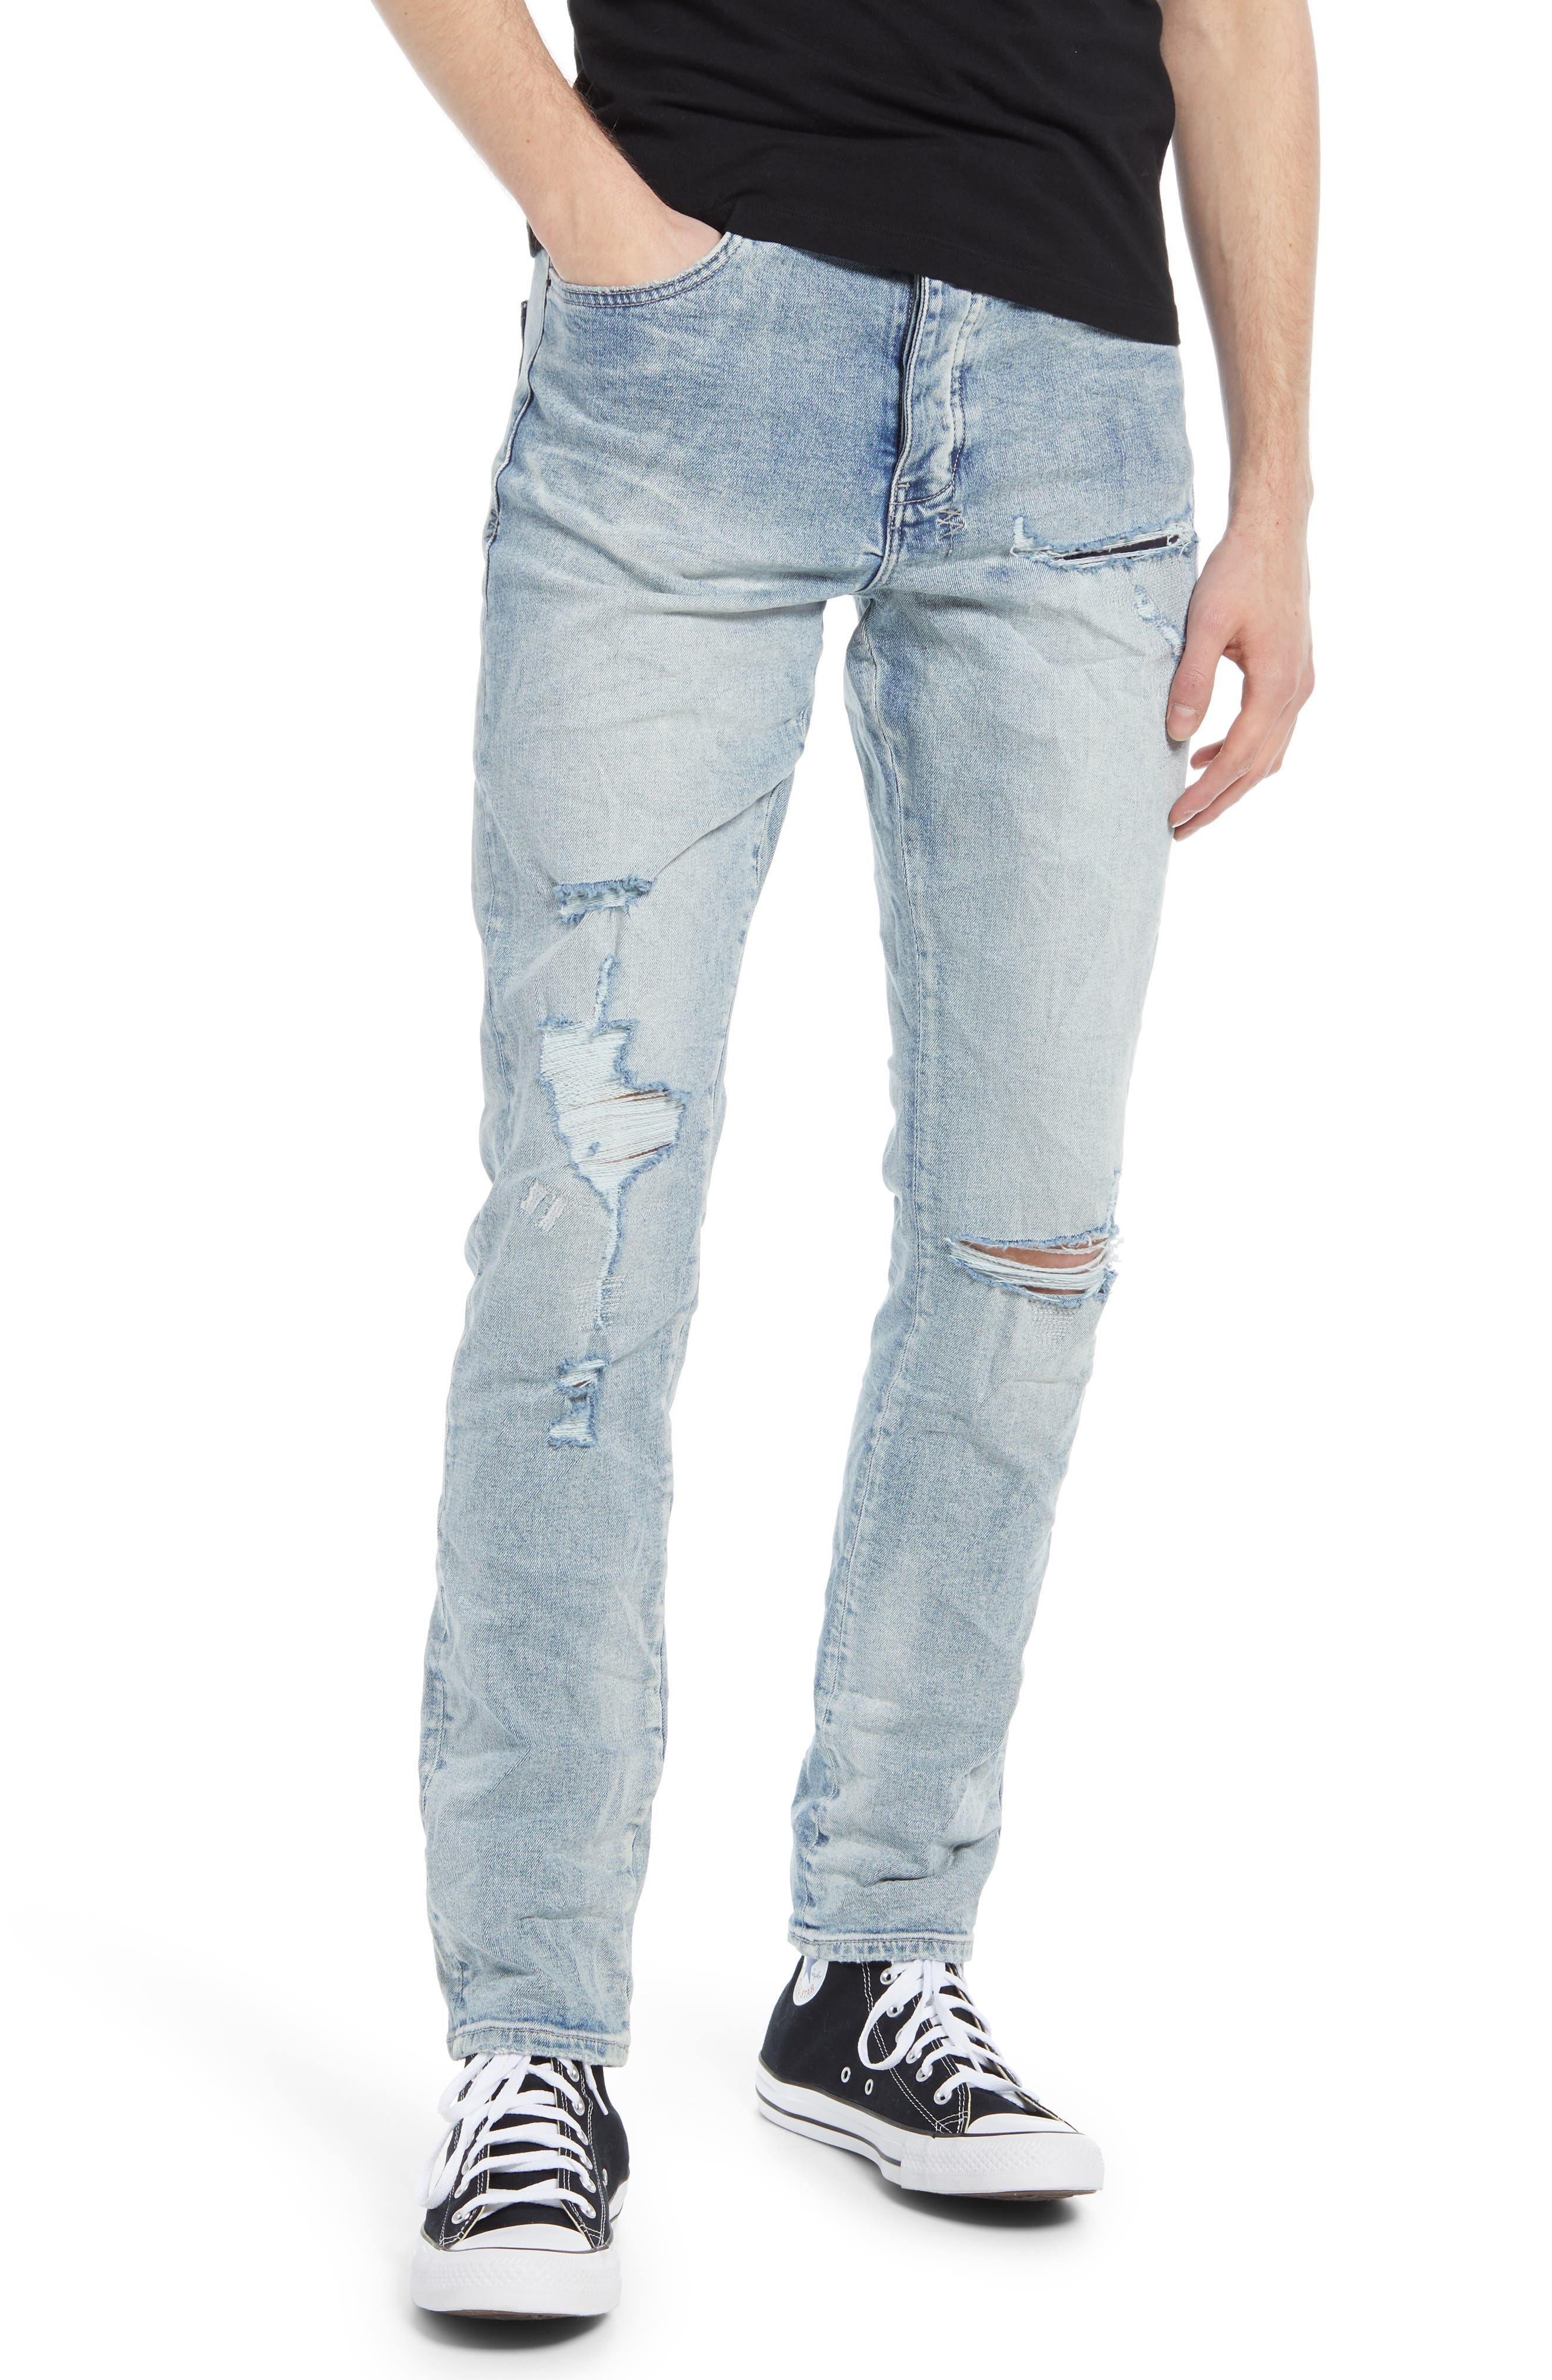 Ksubi Chitch Punk Trashed Skinny Fit Stretch Jeans in Philly Blue at Nordstrom, Size 30 X R